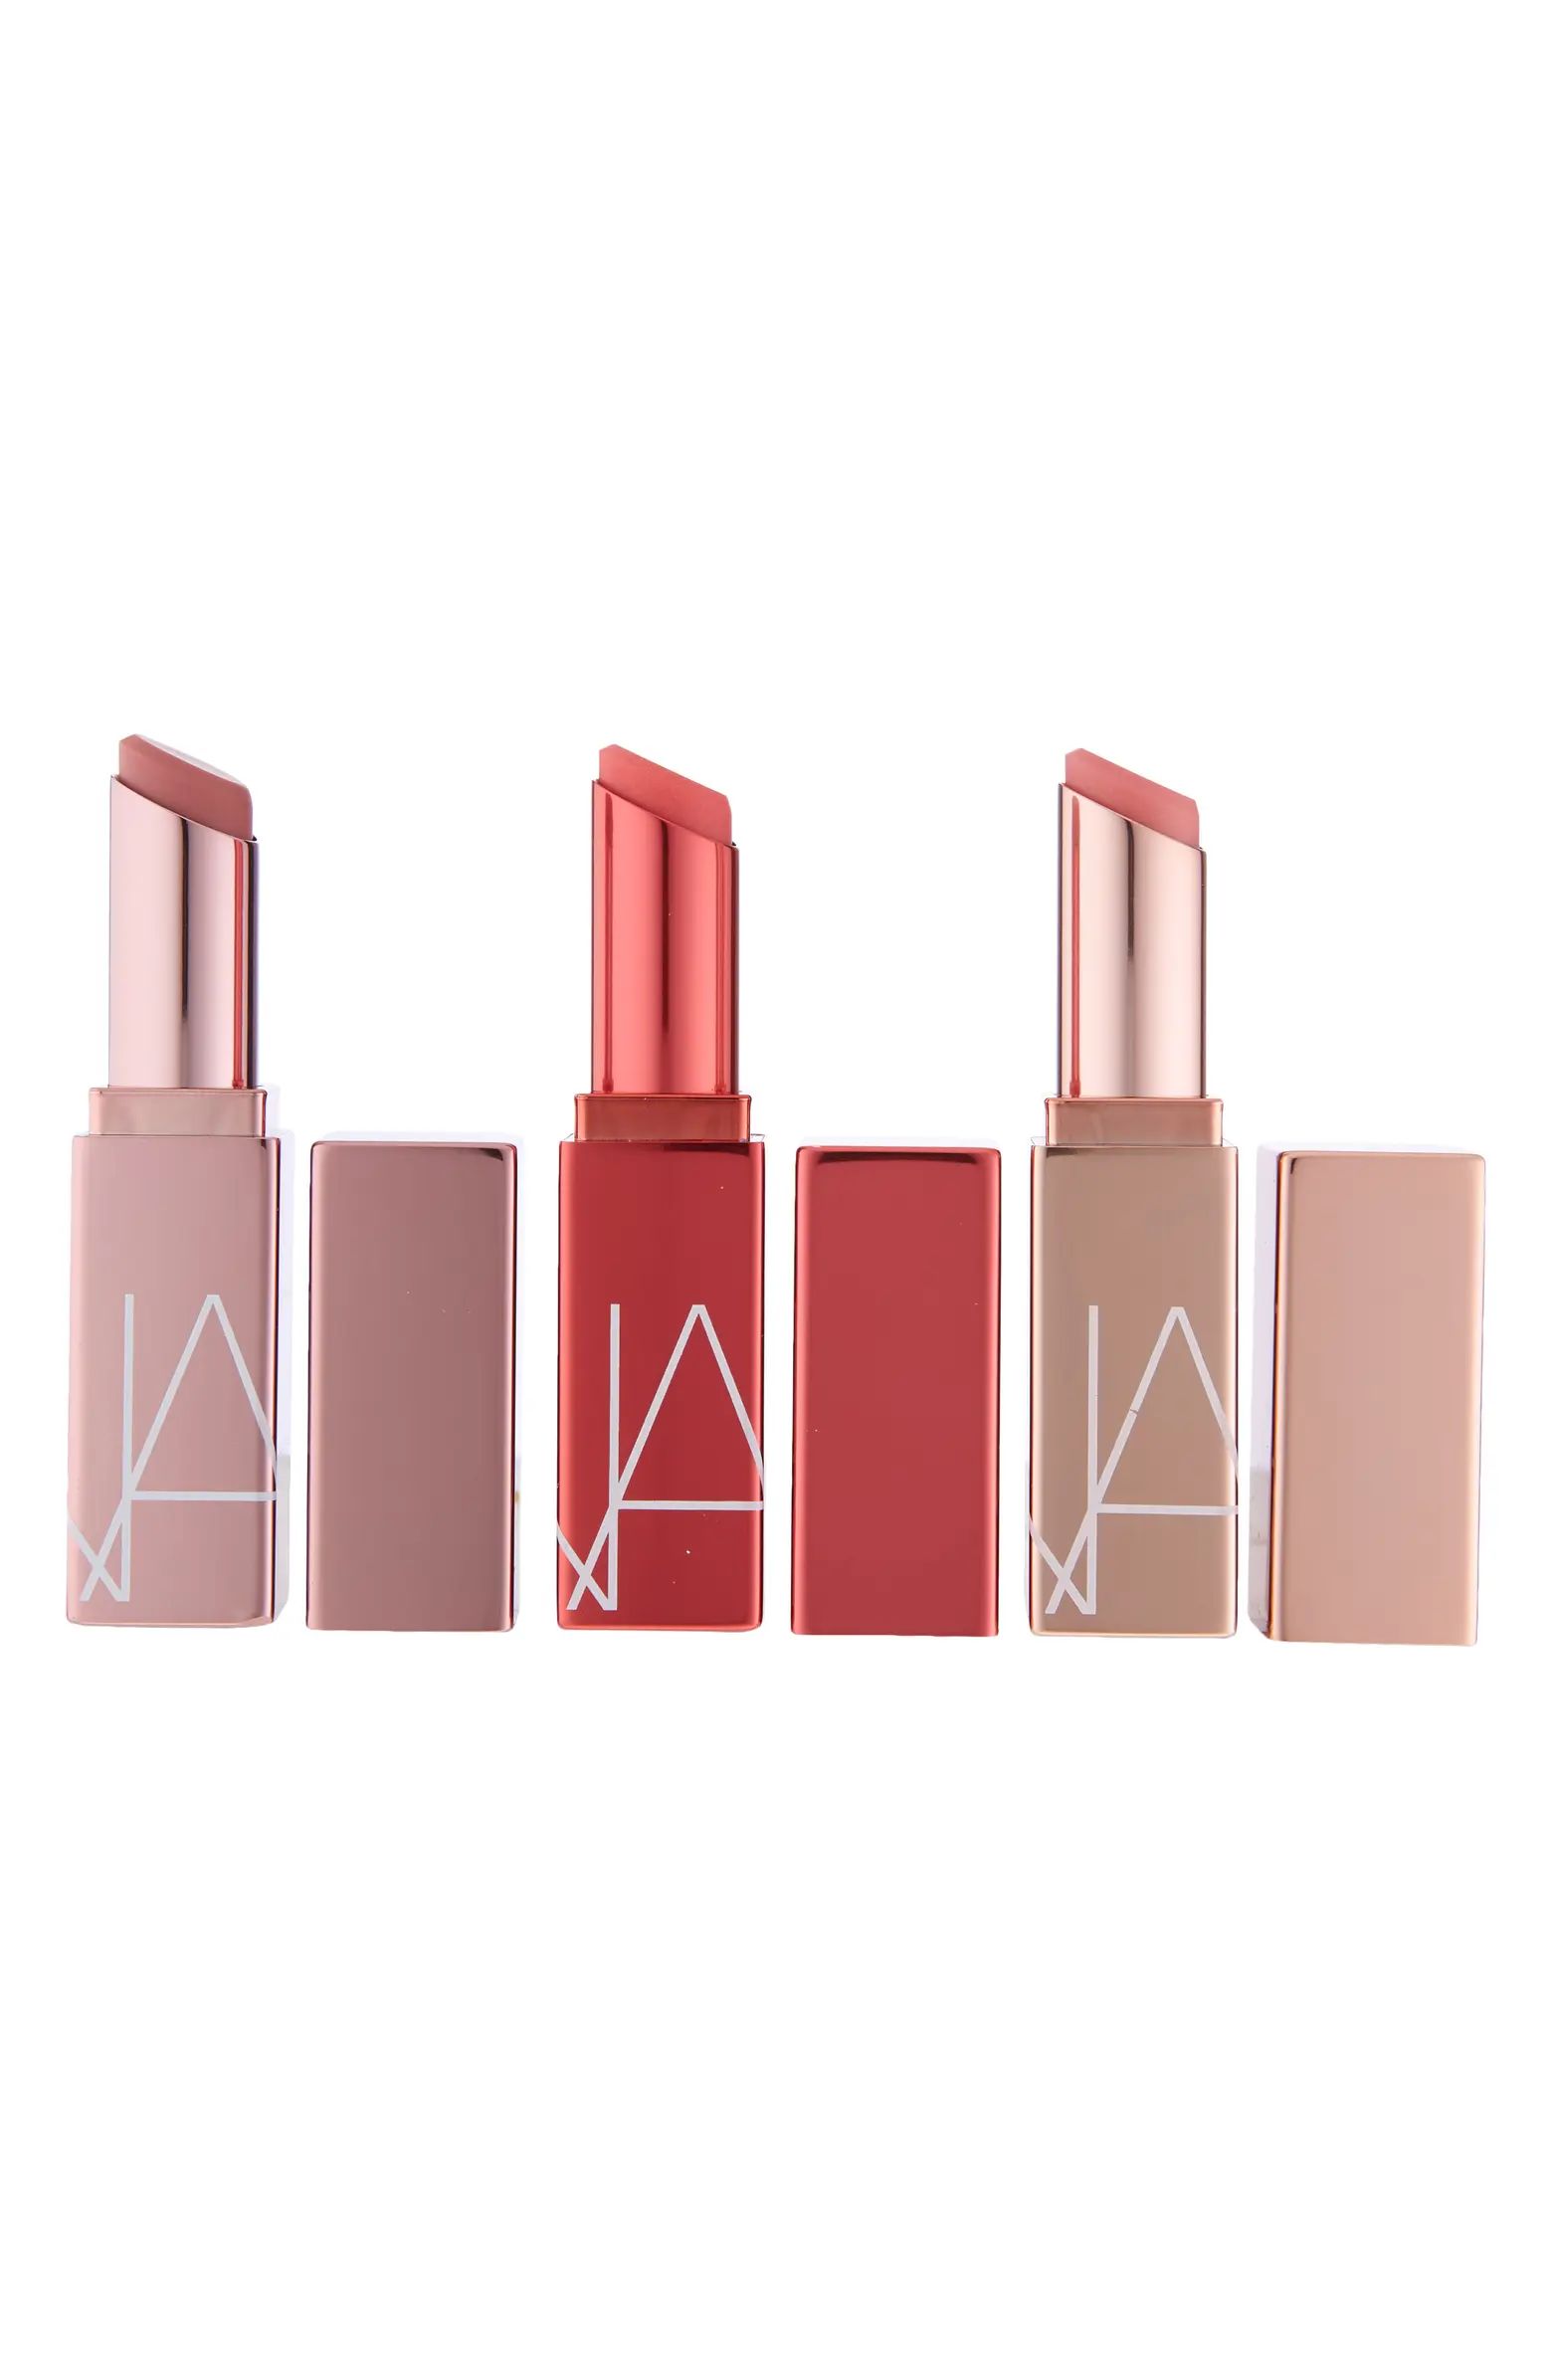 NARS Afterglow Lip Balm Trio $84 Value | Nordstrom | Nordstrom